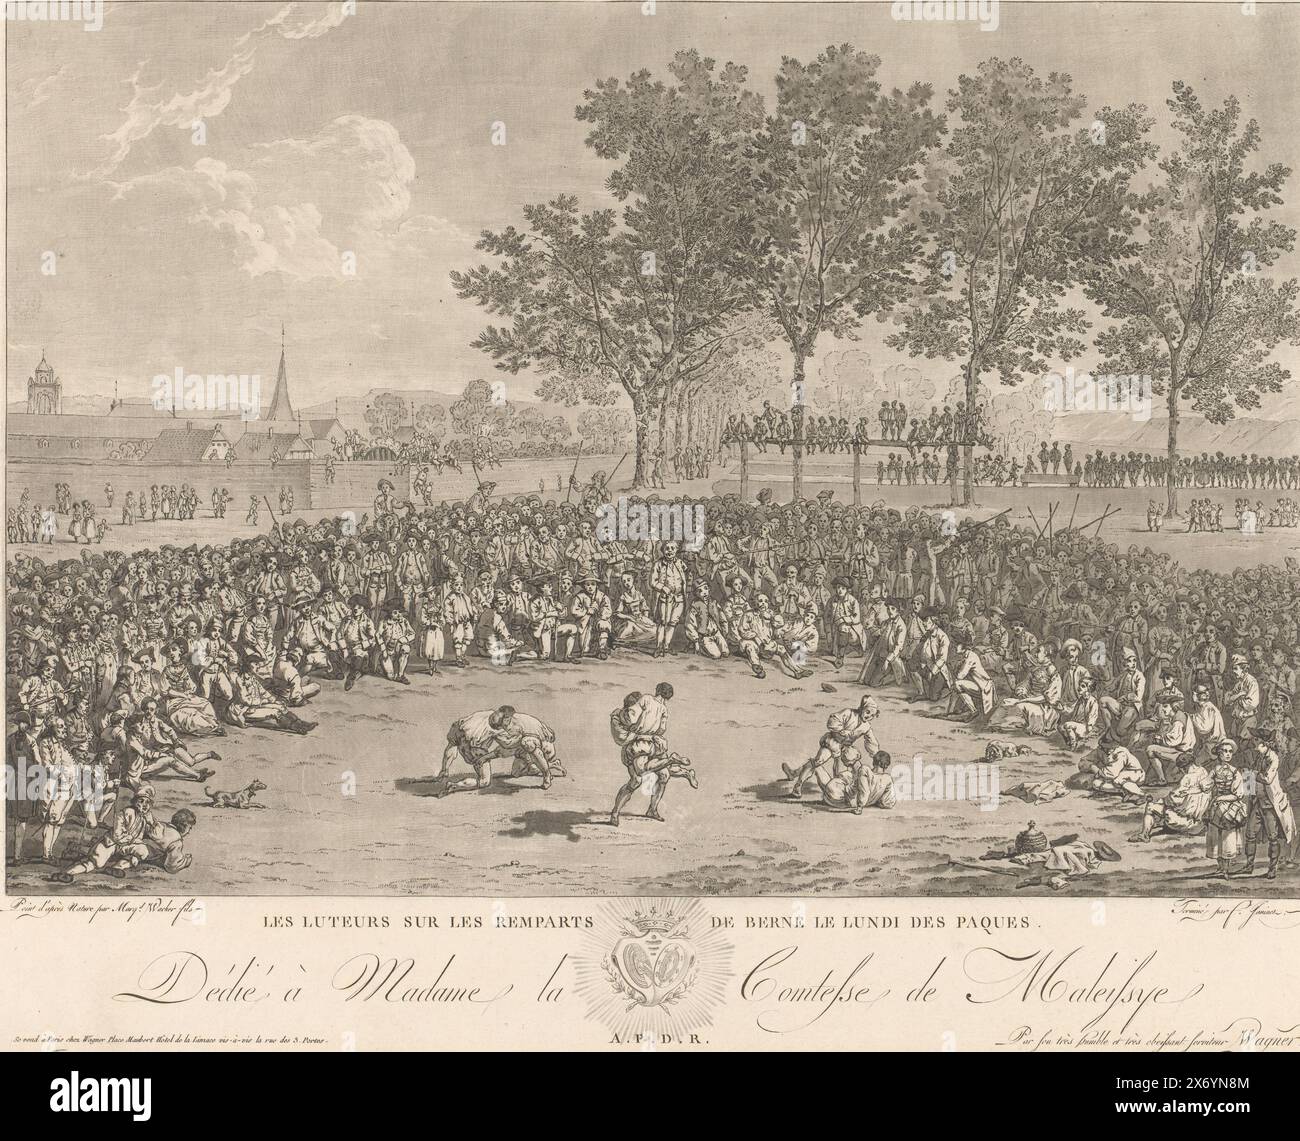 Public wrestling match at Bern, Les Luteurs sur les remparts de Berne le Lundi des Paques (title on object), print, print maker: Jean François Janinet, (mentioned on object), after painting by: Marquard Wocher, (mentioned on object), publisher: Abraham Wagner (uitgever), (mentioned on object), Paris, c. 1775 - c. 1777, paper, etching, height, 336 mm, width, 484 mm Stock Photo